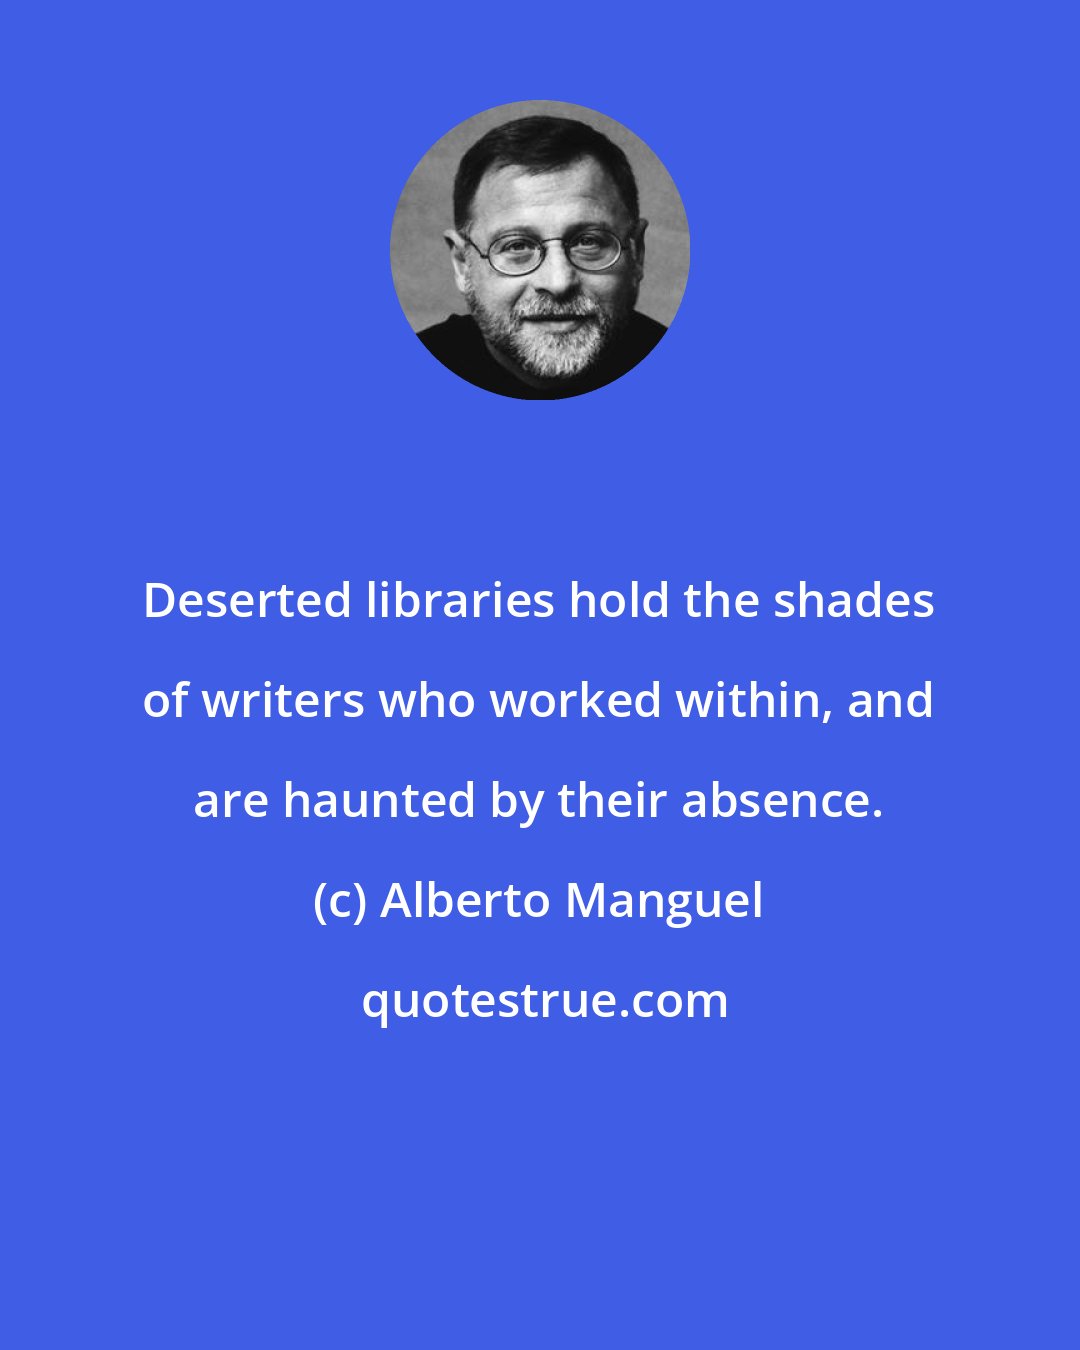 Alberto Manguel: Deserted libraries hold the shades of writers who worked within, and are haunted by their absence.